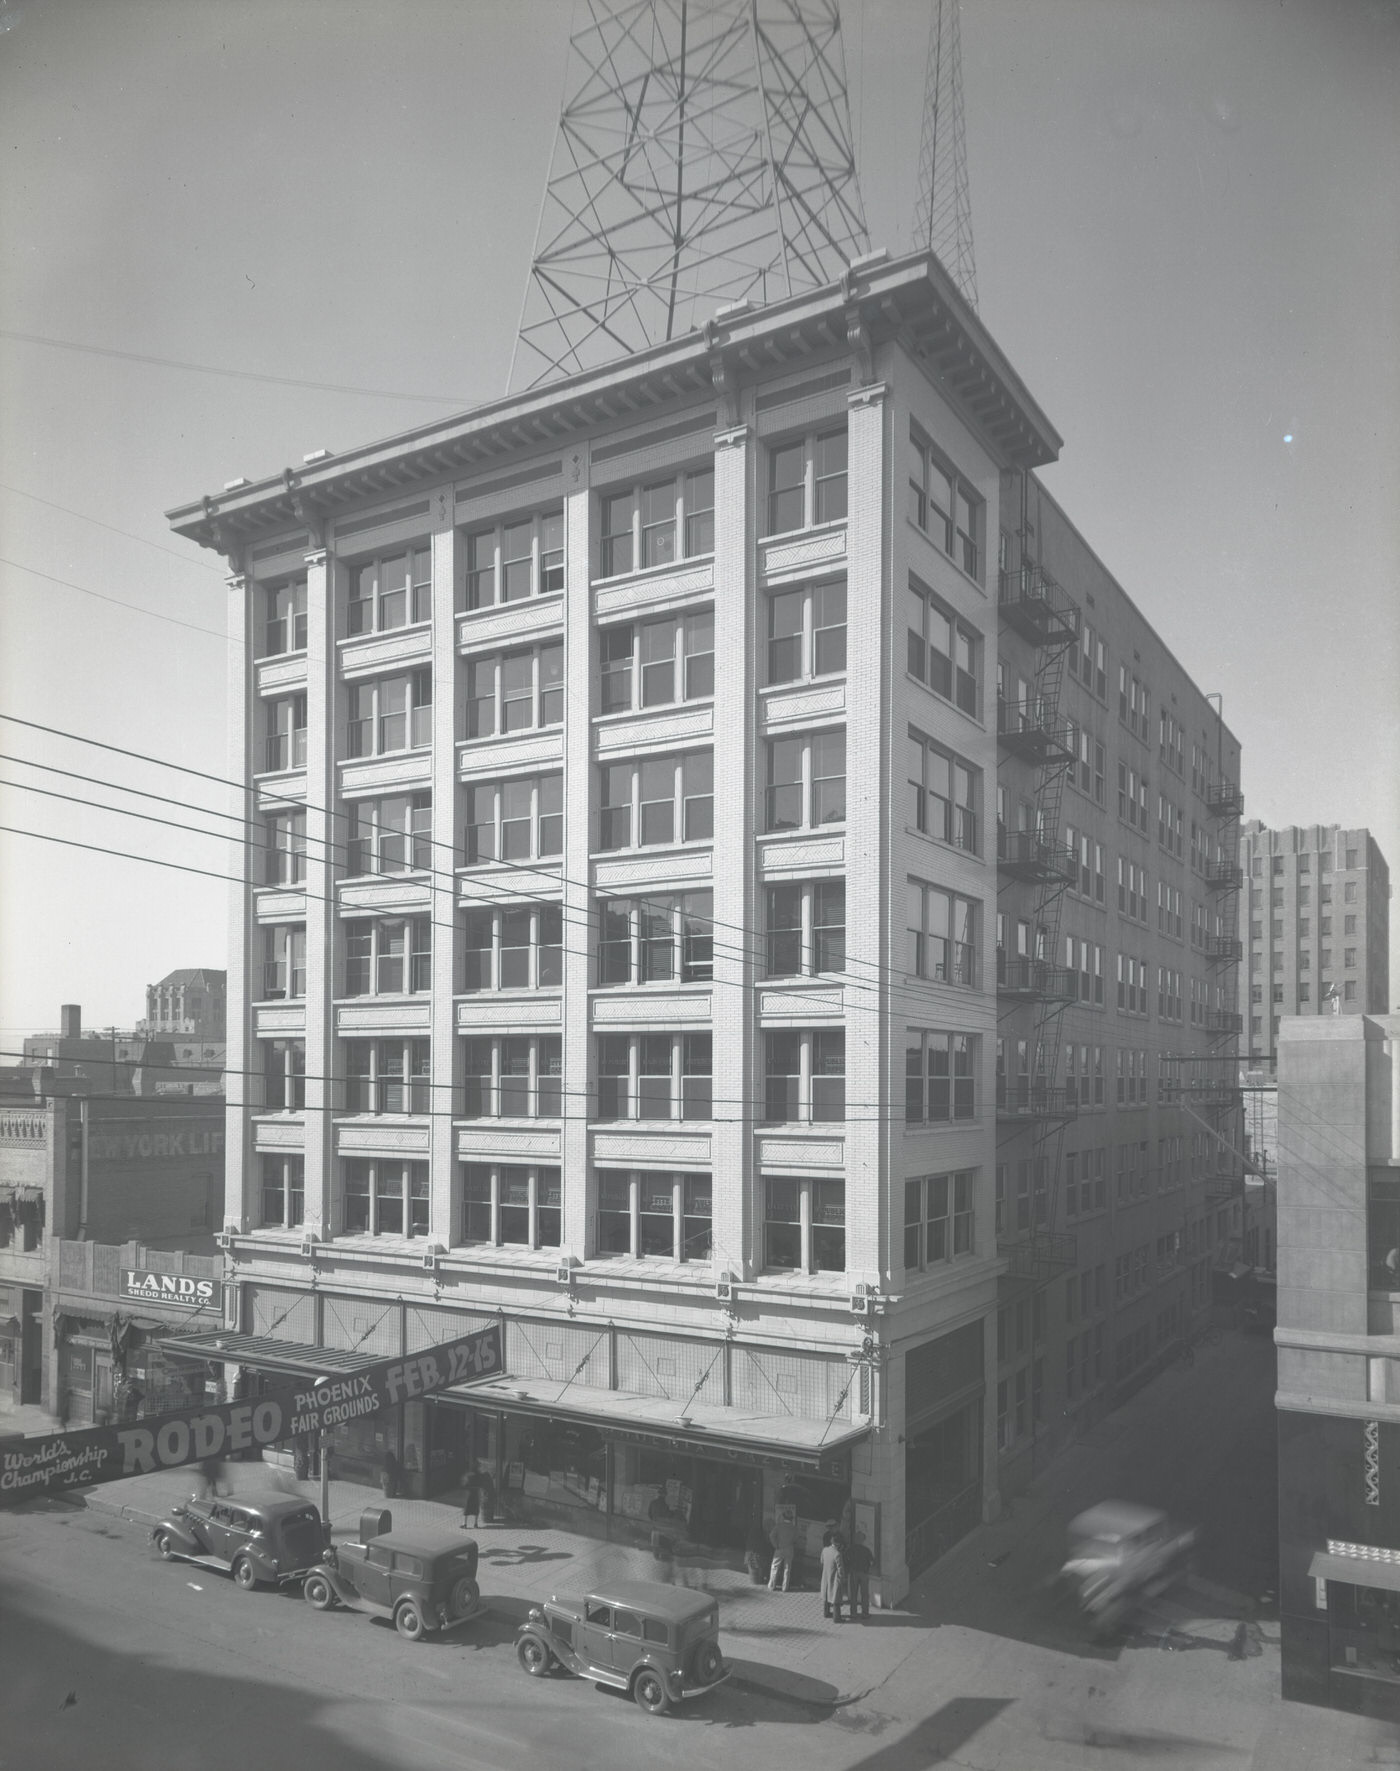 Heard Building Exterior, 1921. This building was located on the southeast corner of Central Avenue and Adams Street in Phoenix.